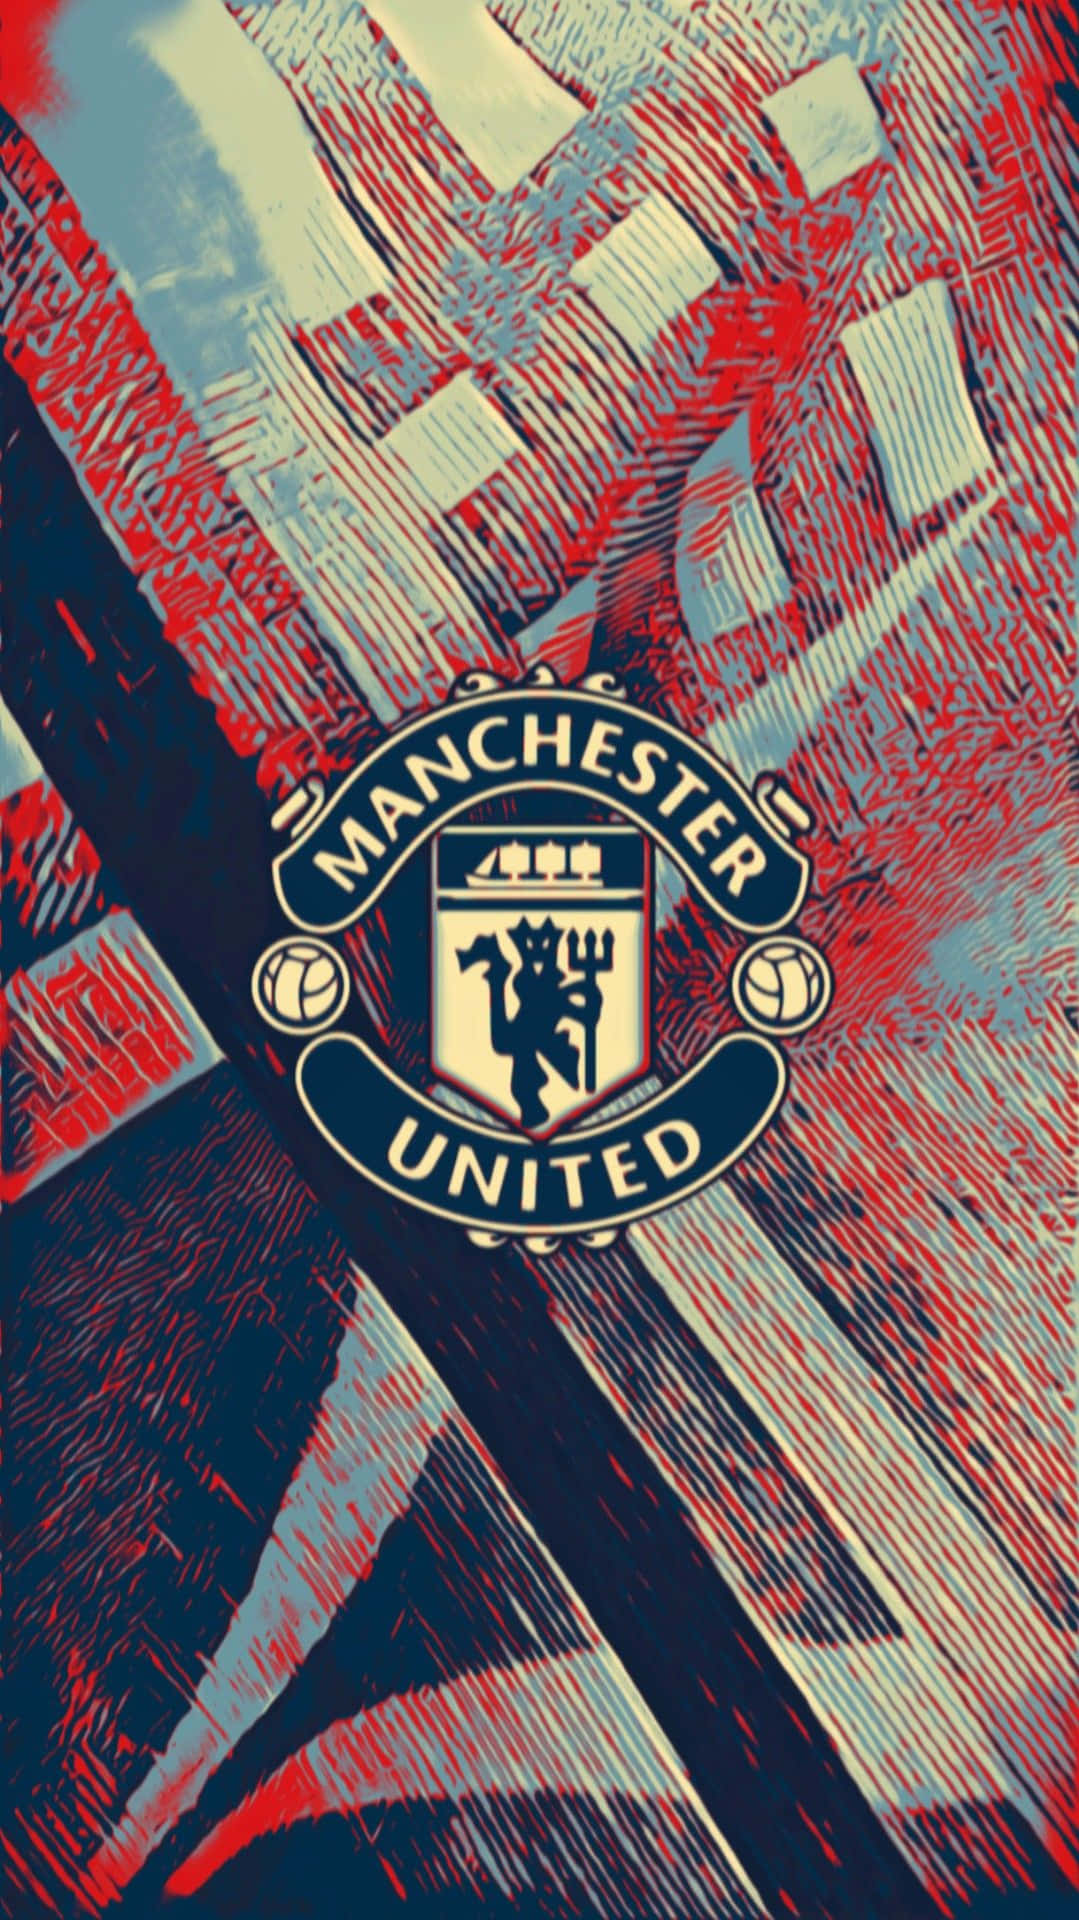 100+] Manchester United Iphone Wallpapers | Wallpapers.Com